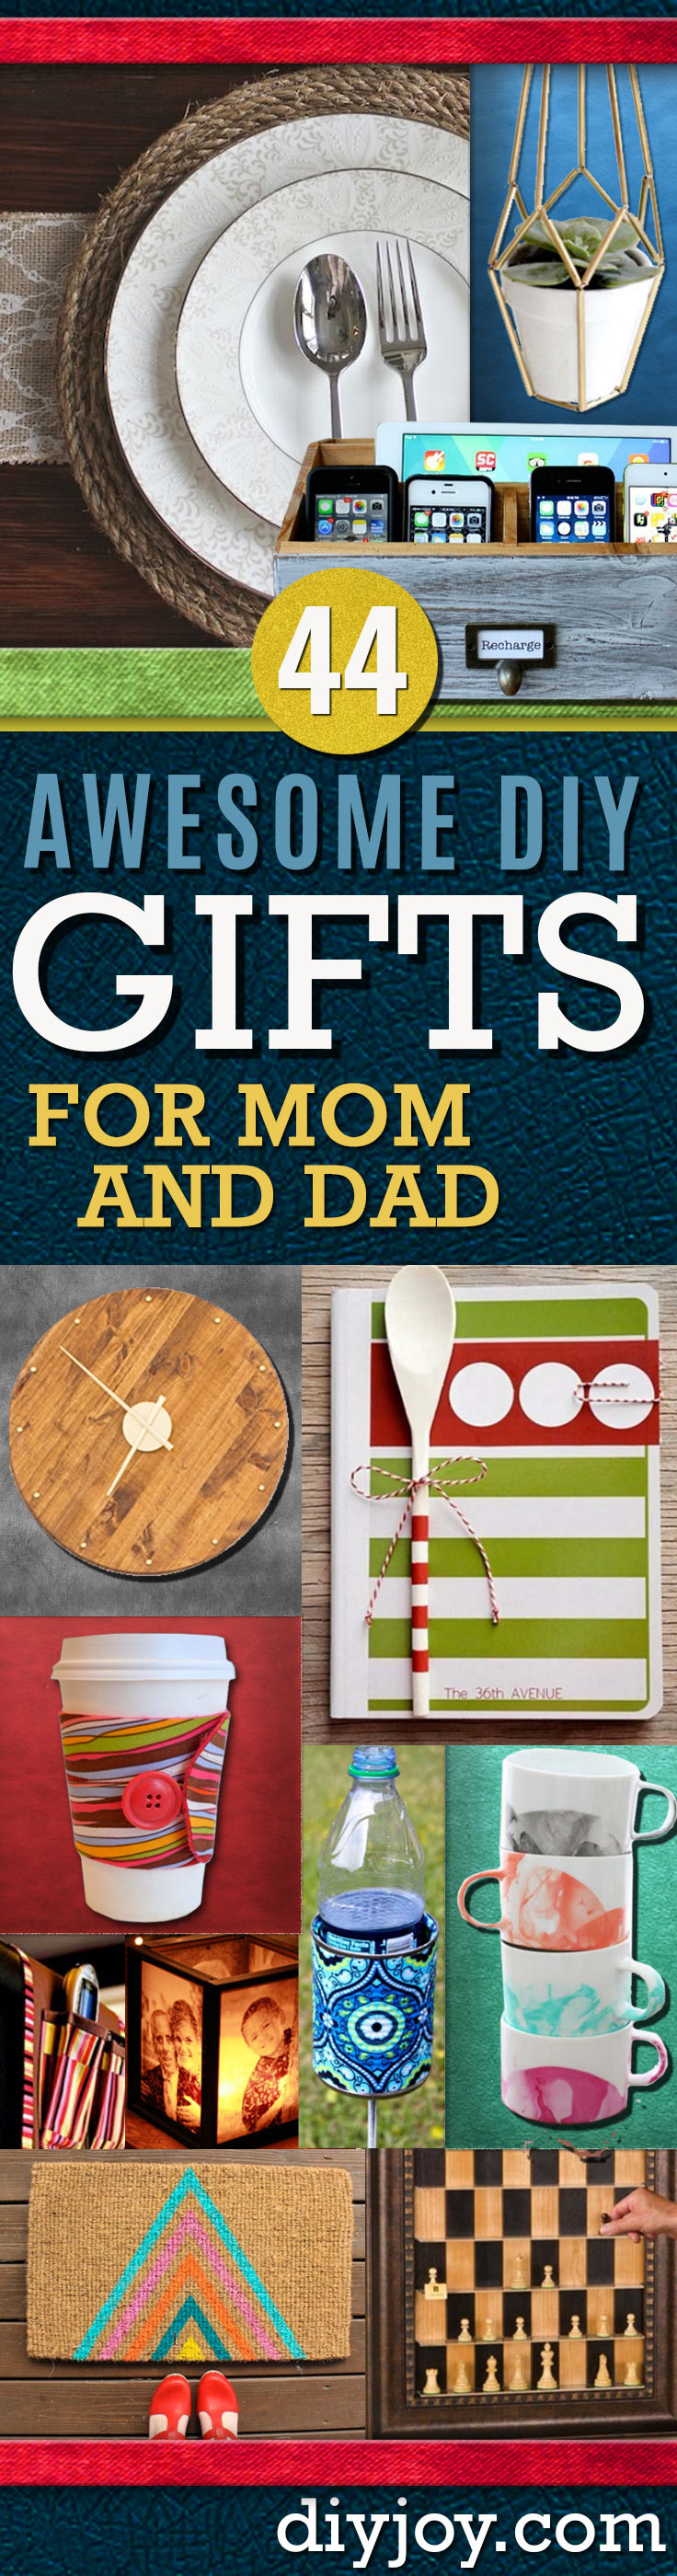 DIY Christmas Presents For Moms
 Awesome DIY Gift Ideas Mom and Dad Will Love